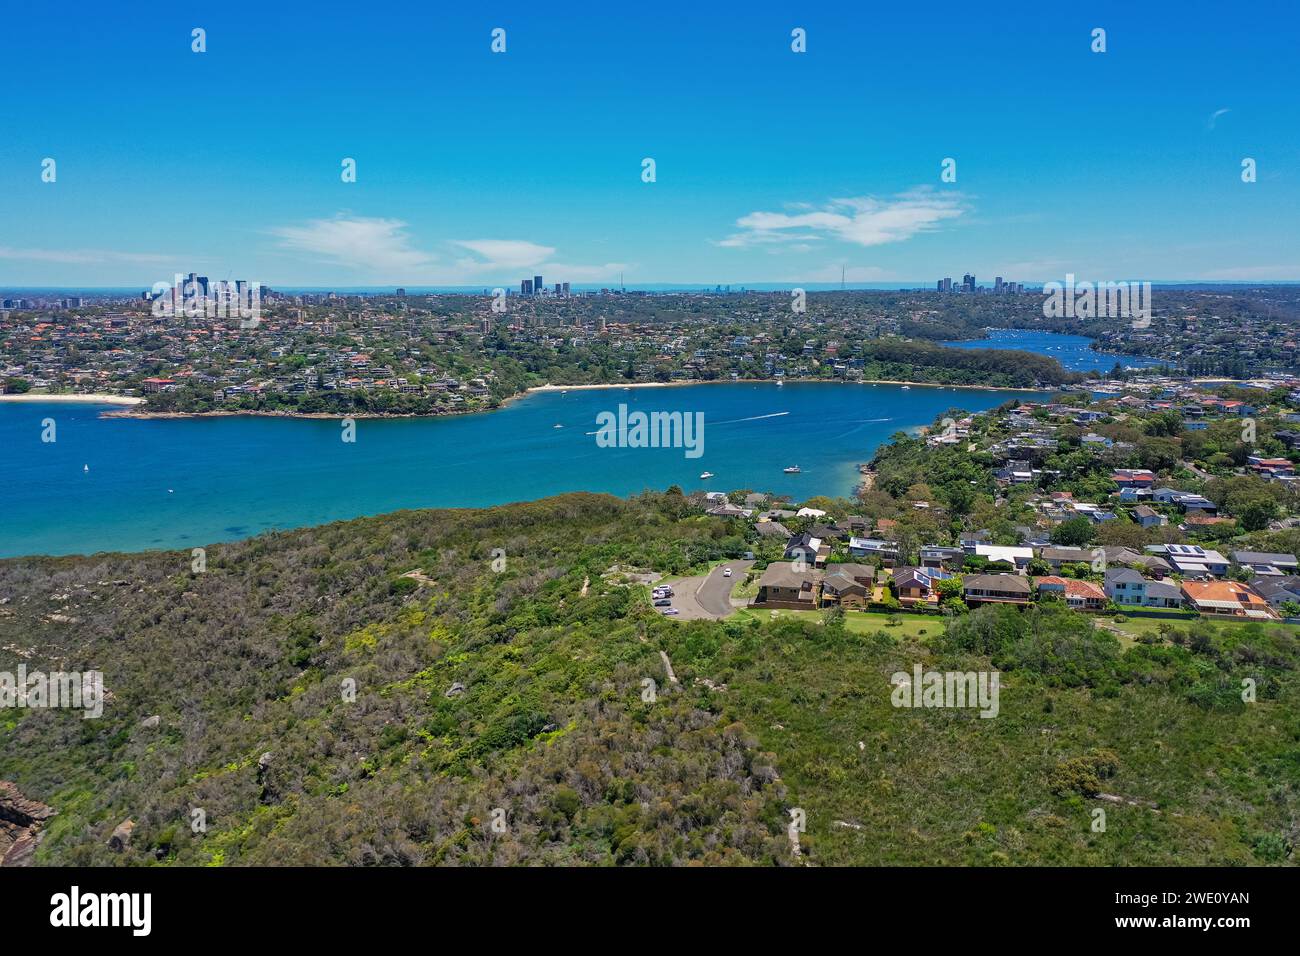 Beautiful high angle aerial drone view of Edwards Beach and Chinamans Beach in the suburb of Mosman, Sydney, New South Wales, Australia. North Sydney, Stock Photo